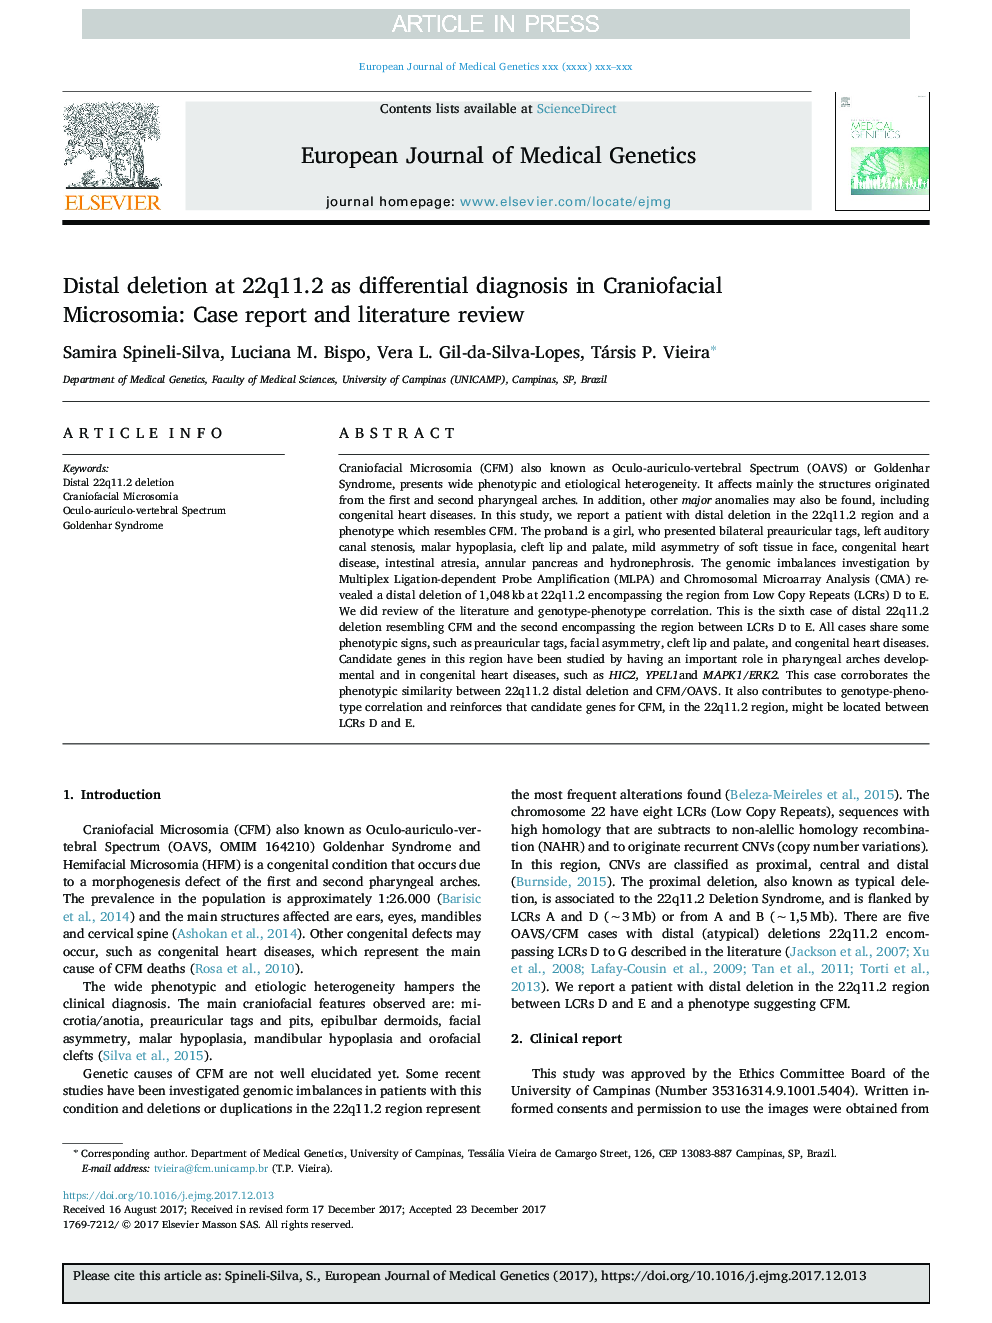 Distal deletion at 22q11.2 as differential diagnosis in Craniofacial Microsomia: Case report and literature review